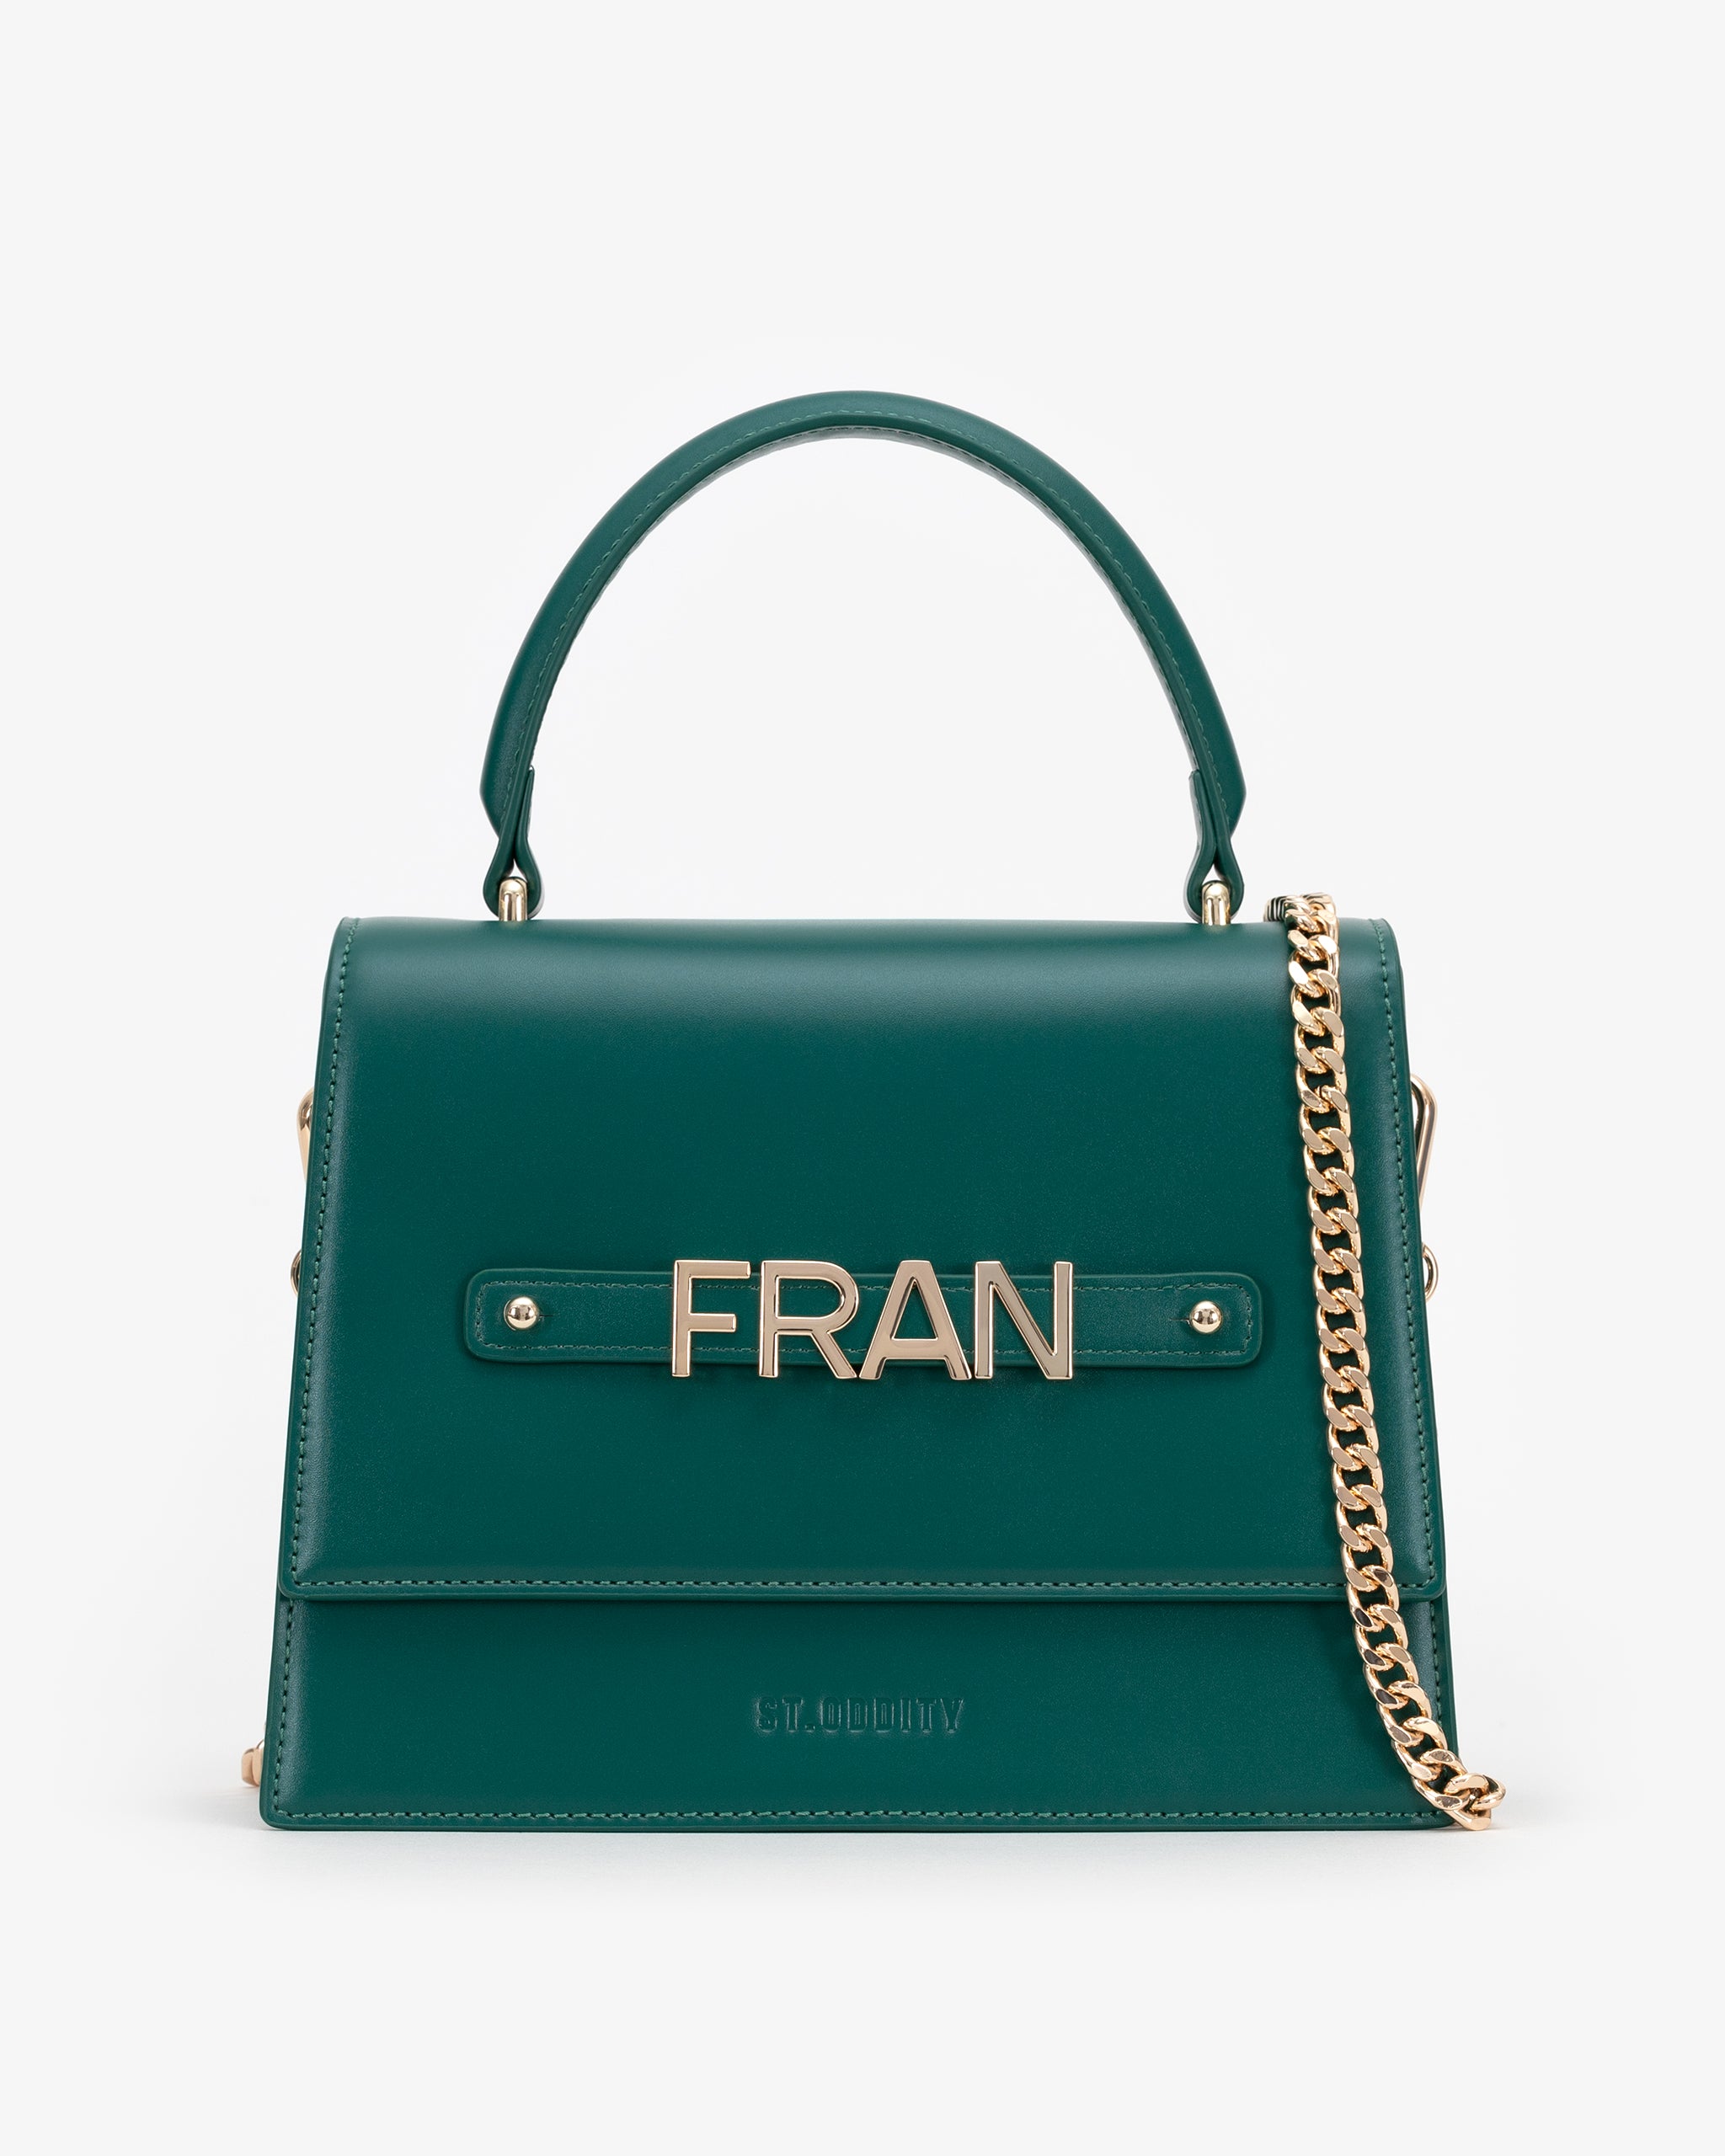 Pre-order (Mid-May): Large Evening Bag in Emerald Green with Personalised Hardware